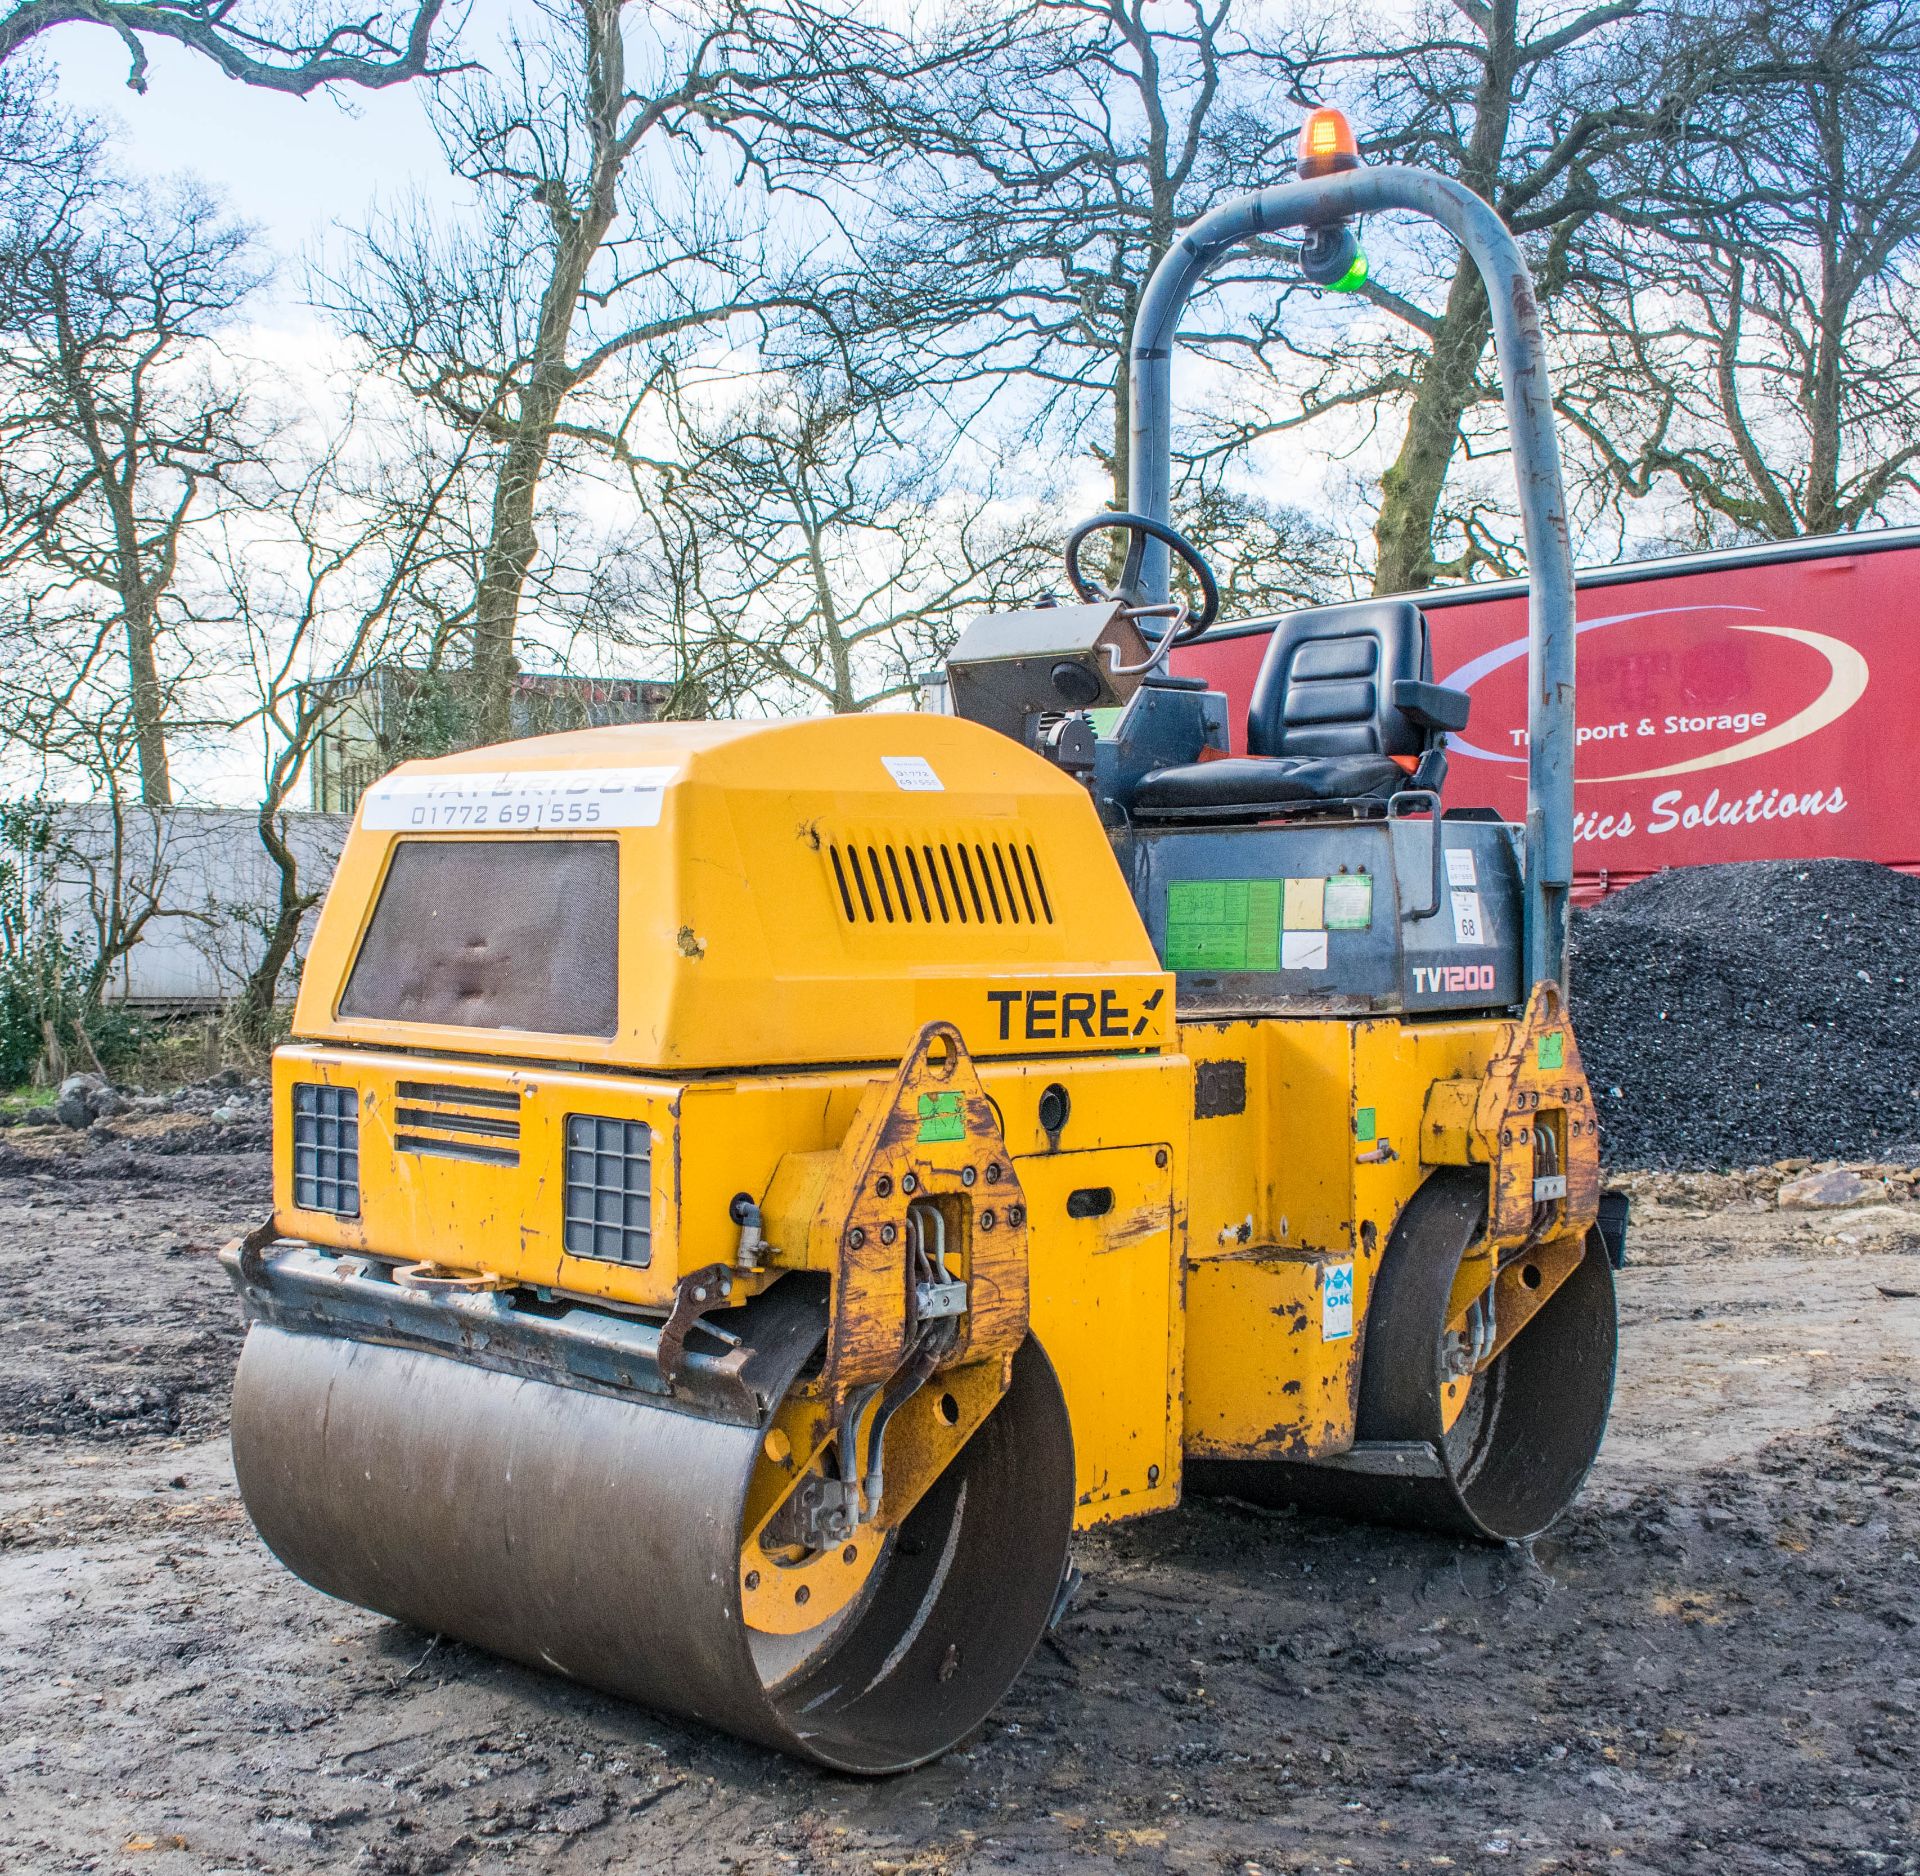 Benford Terex TV1200 double drum roller Year: 2005 S/N: E507CC216 Recorded Hours: 1618 86